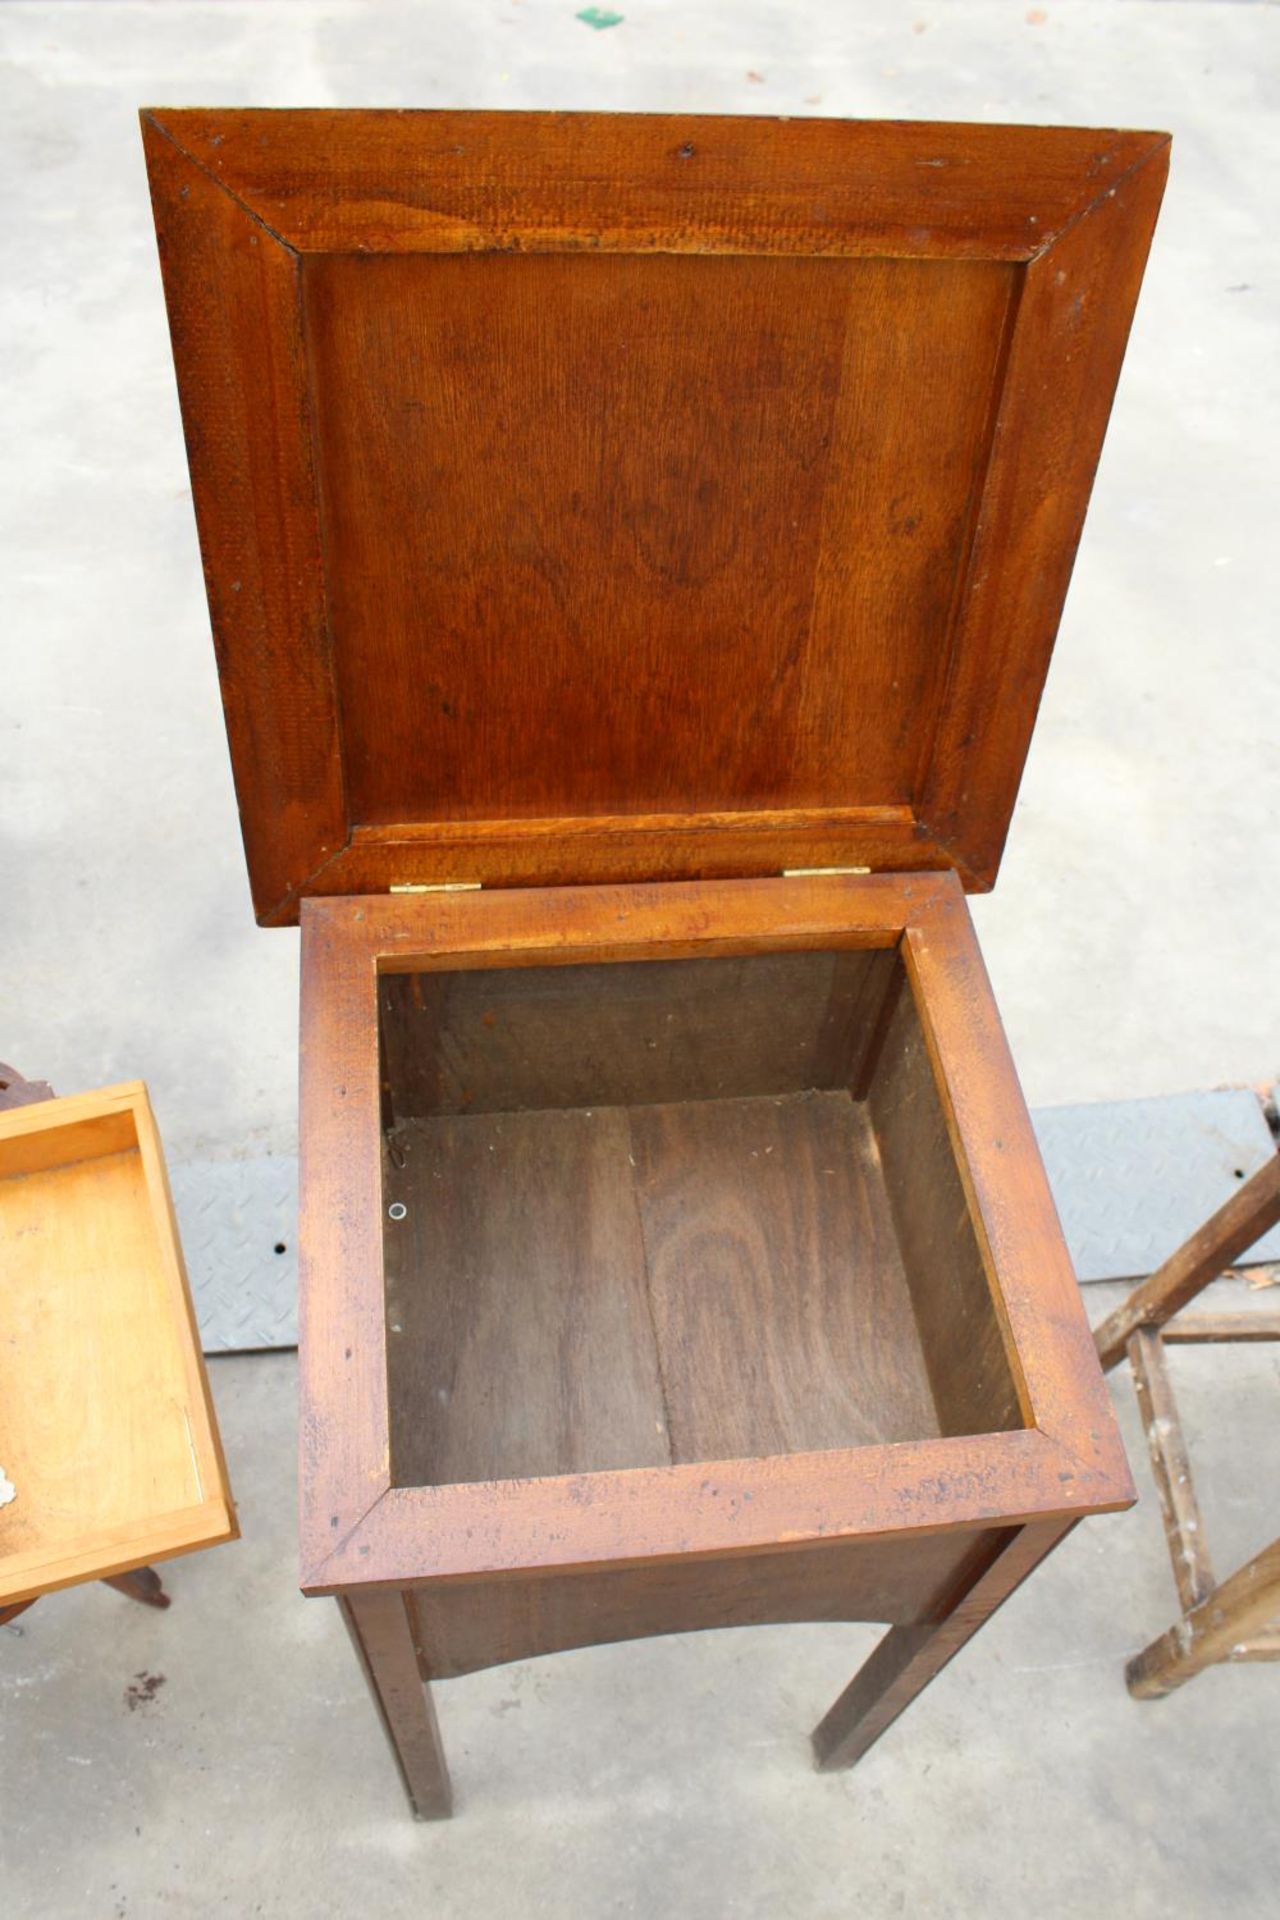 A MID 20TH CENTURY WORK BOX/TABLE - Image 3 of 3